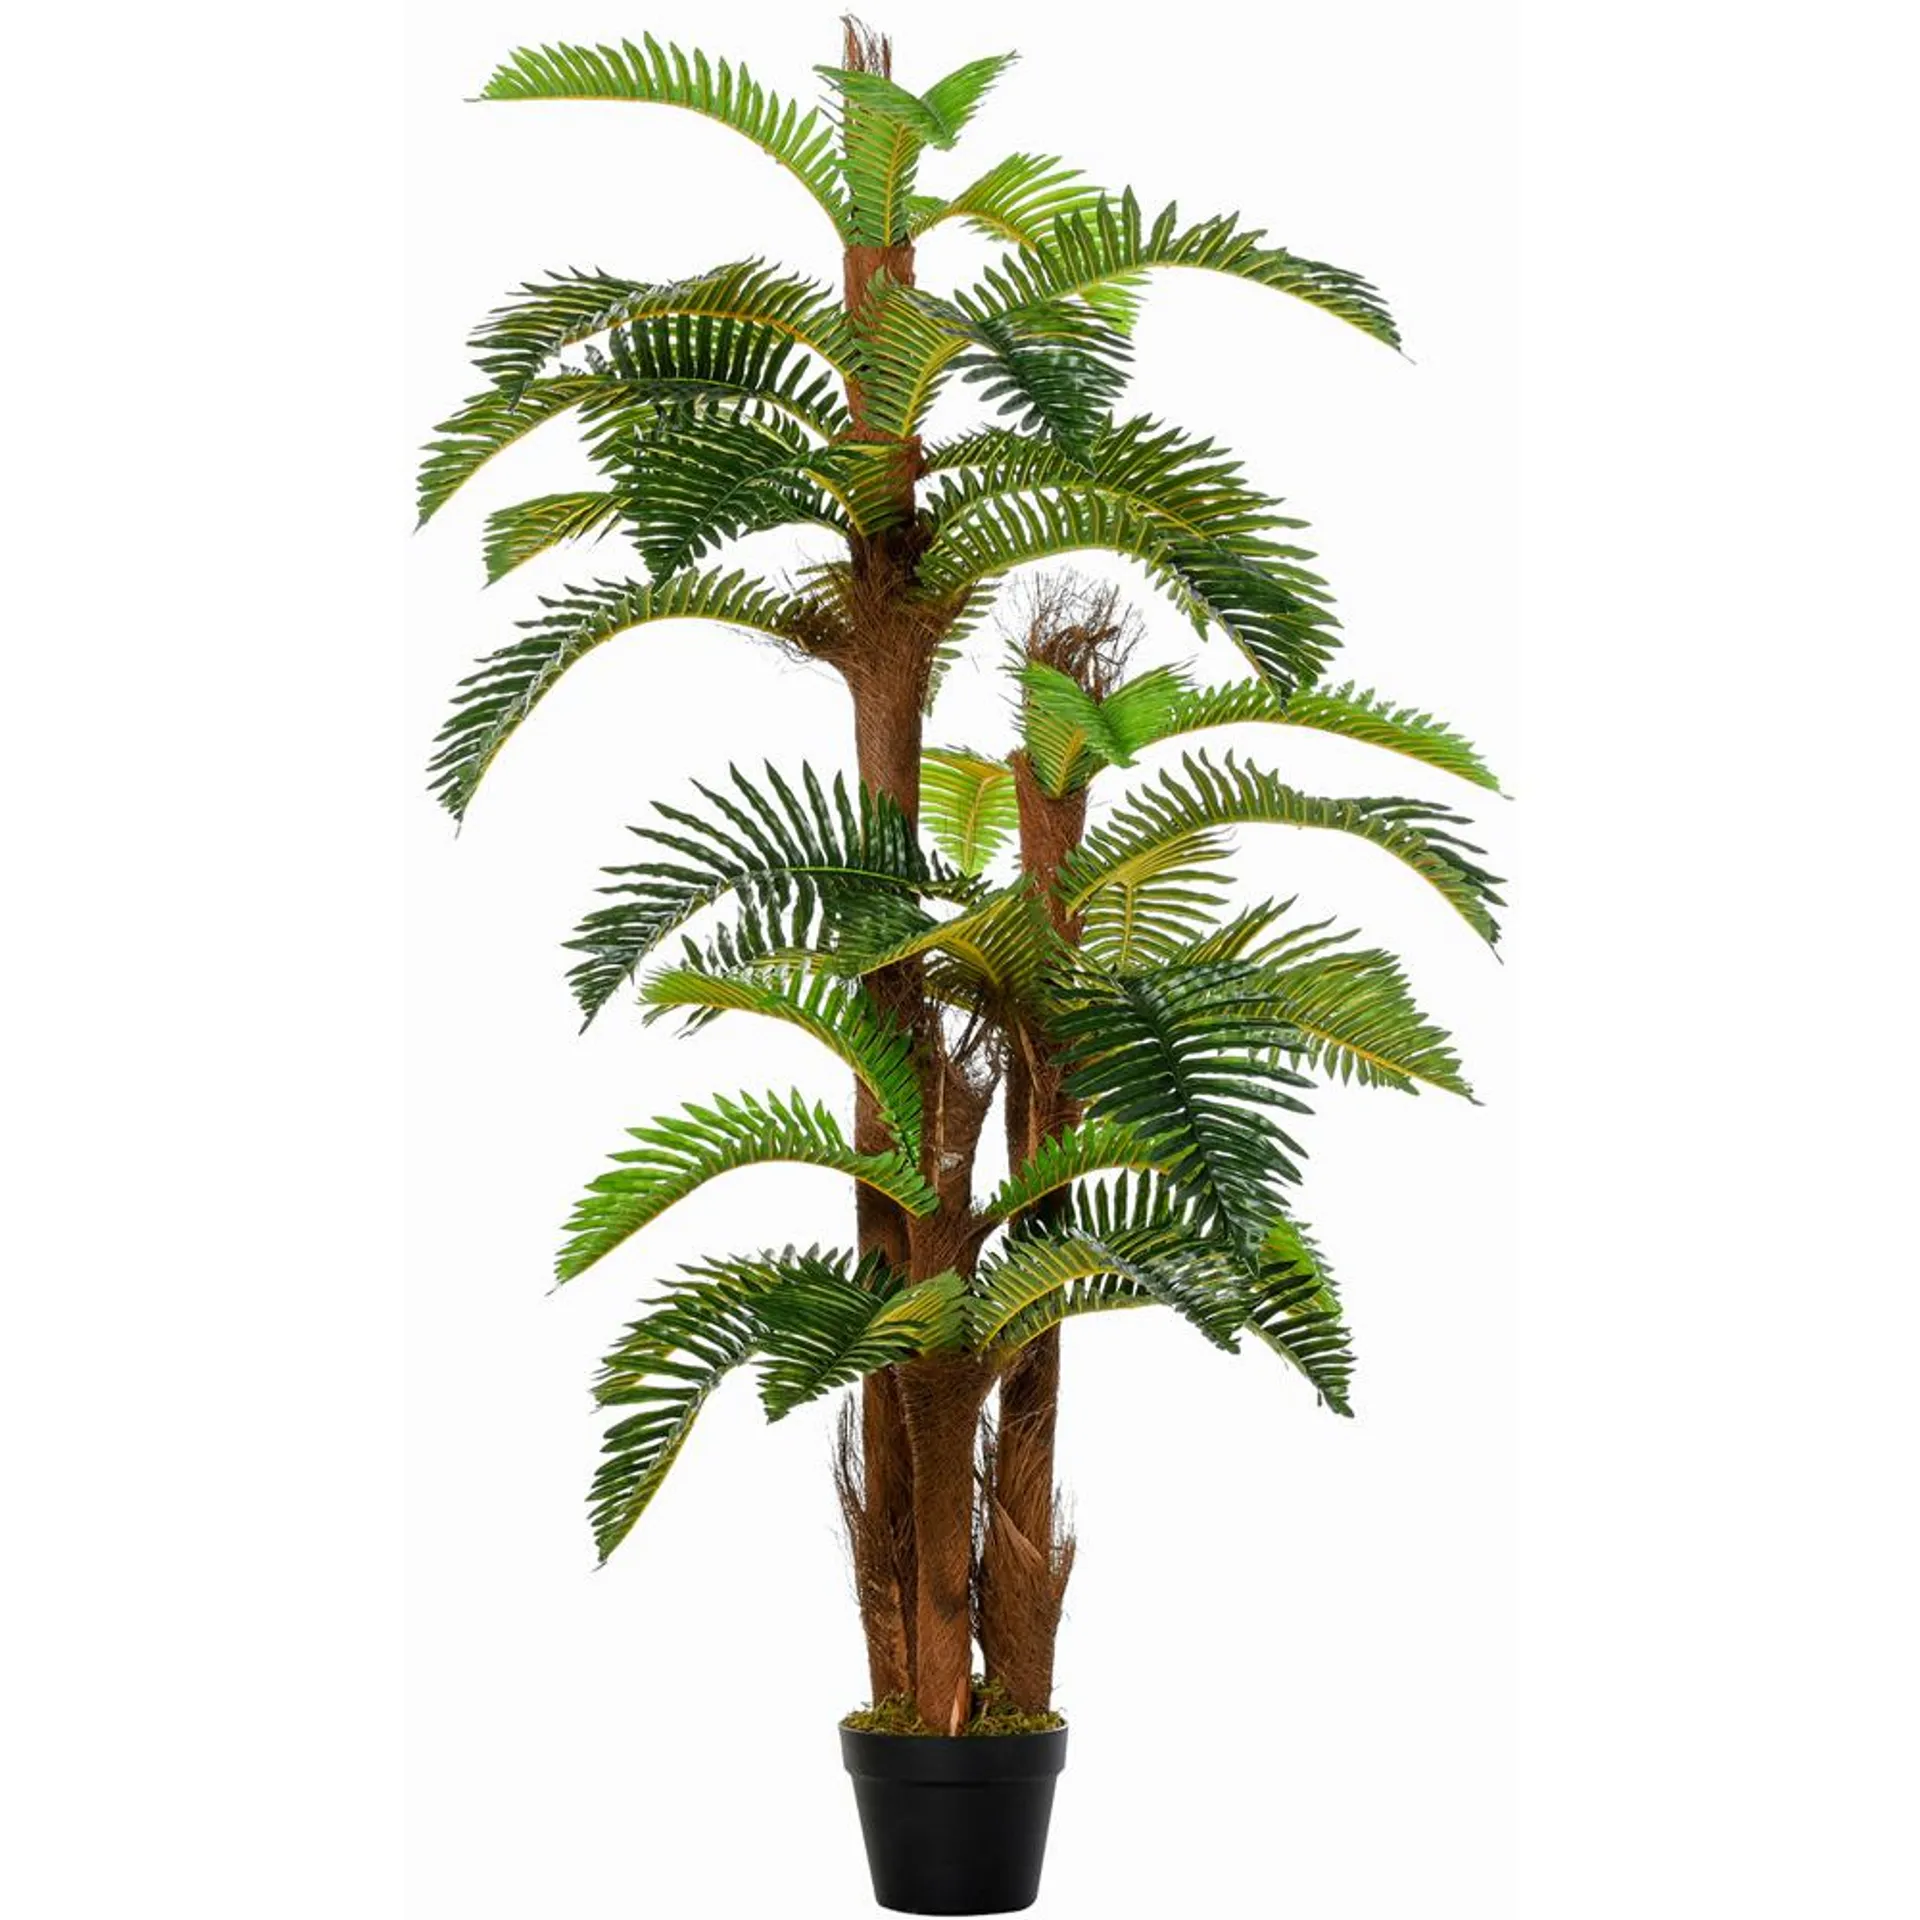 Outsunny Fern Tree Artificial Plant In Pot 5ft